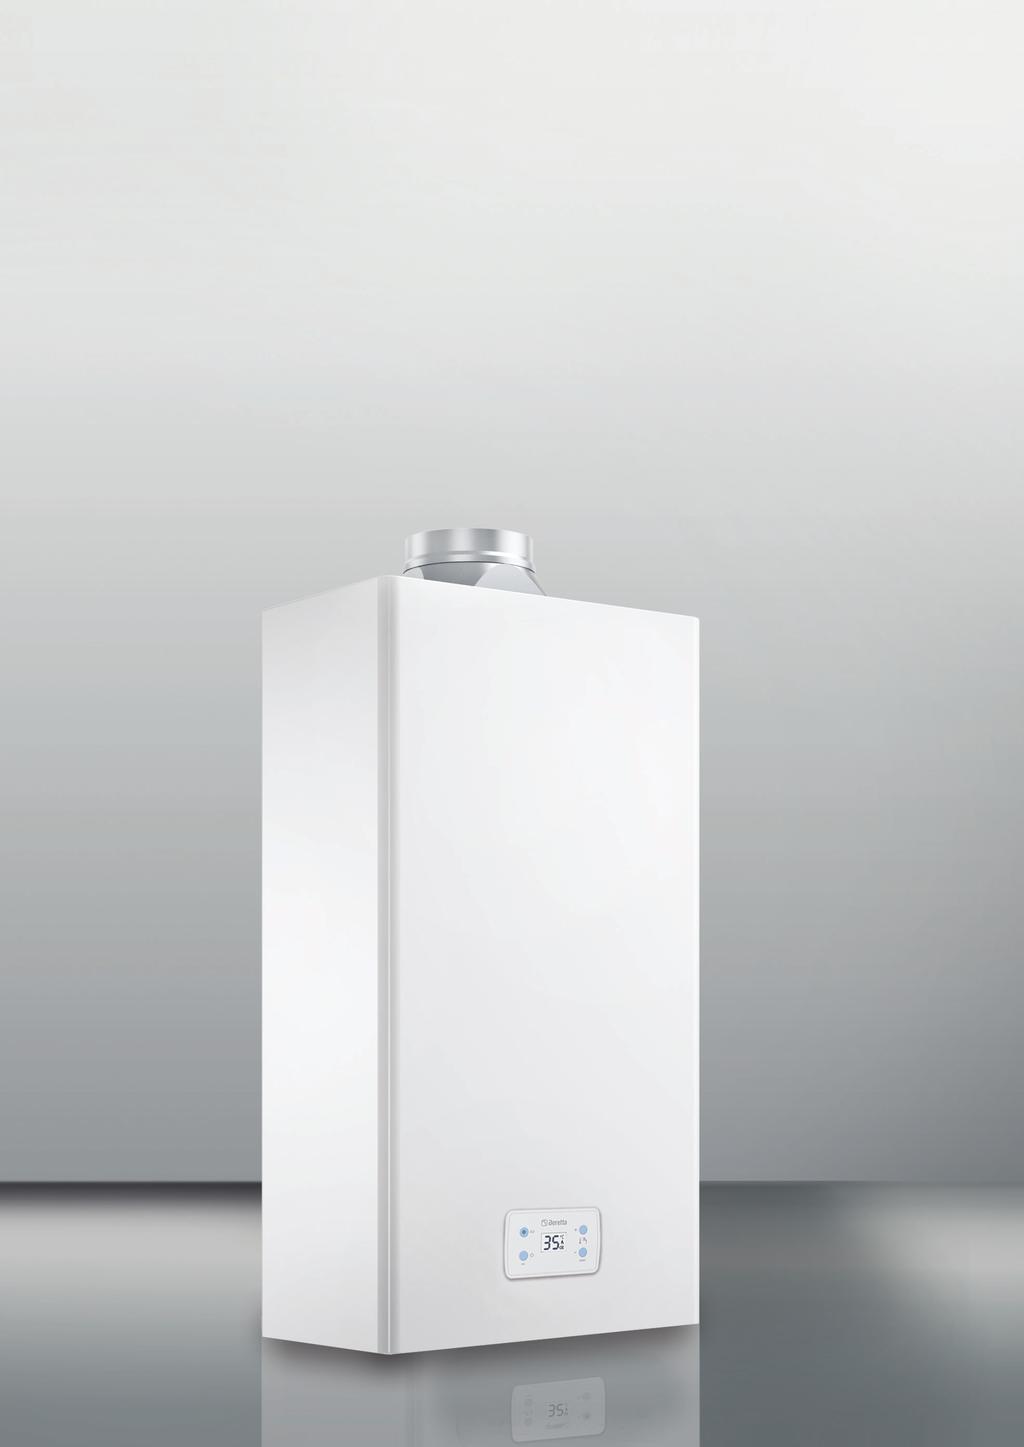 FONTE Lx / Gas Water Heaters, conventional flue, low NOx THE RANGE FONTE Lx, the new generation of conventional flue water heaters Within the new generation of products with low NOx emissions, Fonte